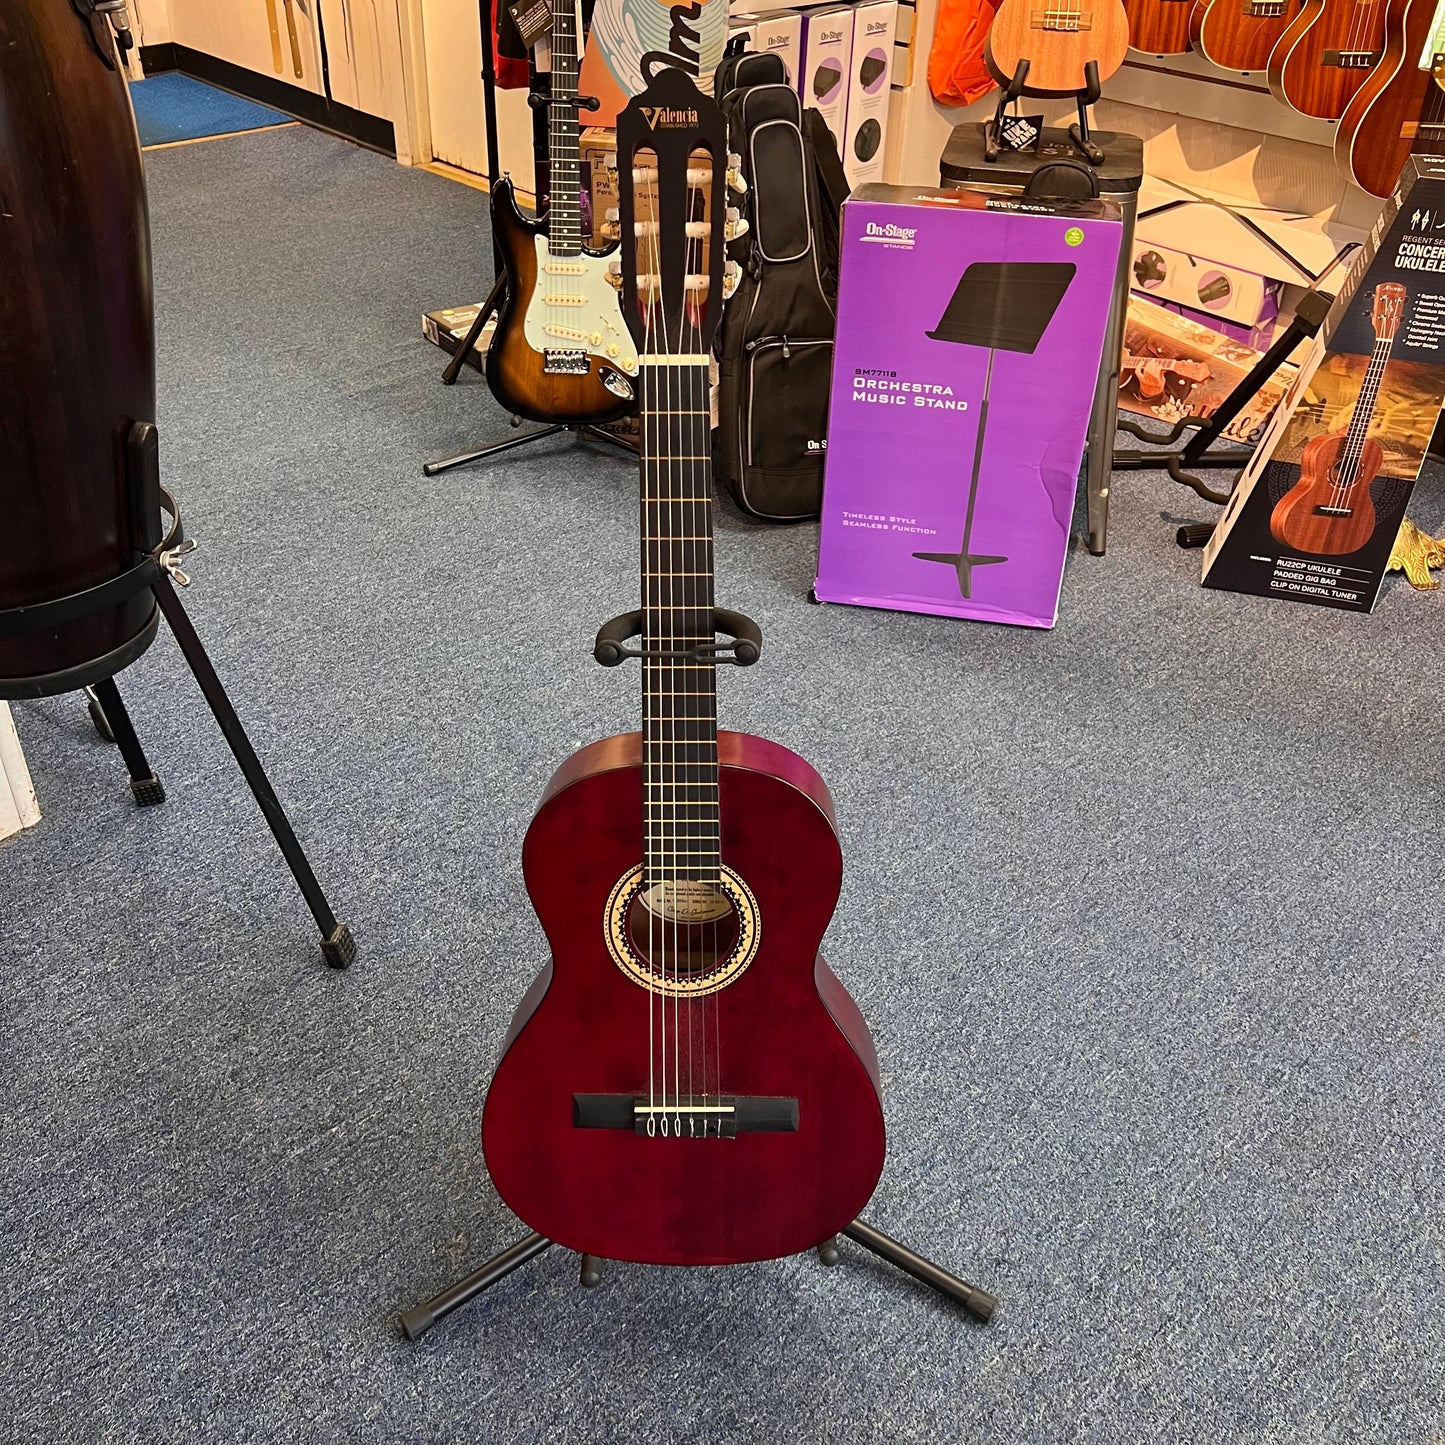 Valencia 3/4 Sz. Classical Guitar Wine Red (used)